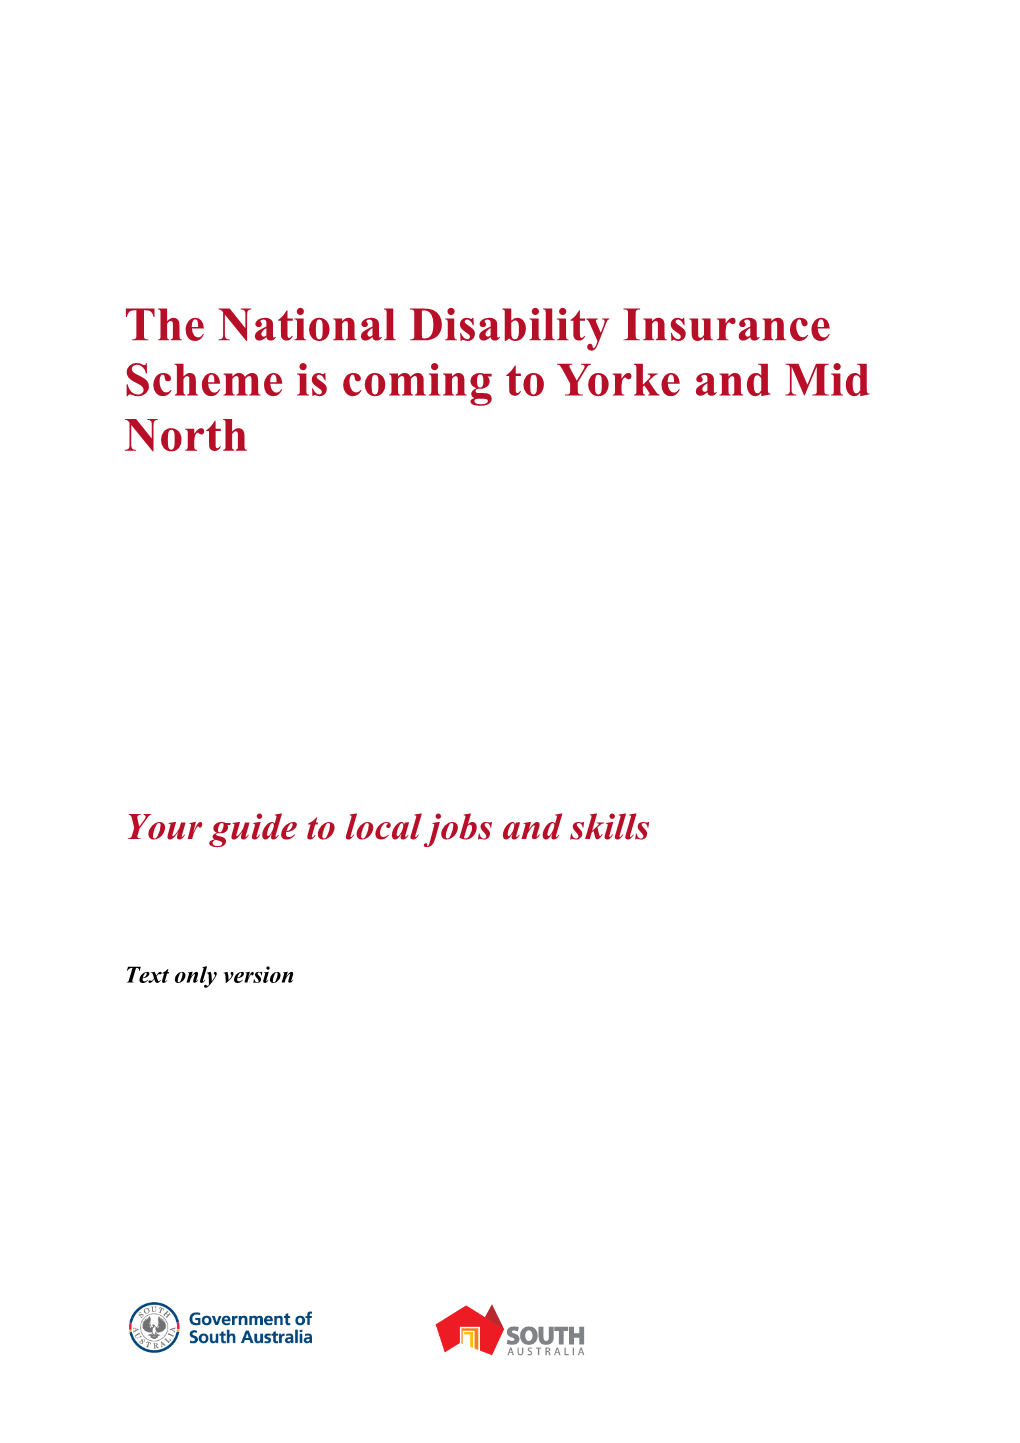 The National Disability Insurance Scheme Is Coming Toyorke and Mid North